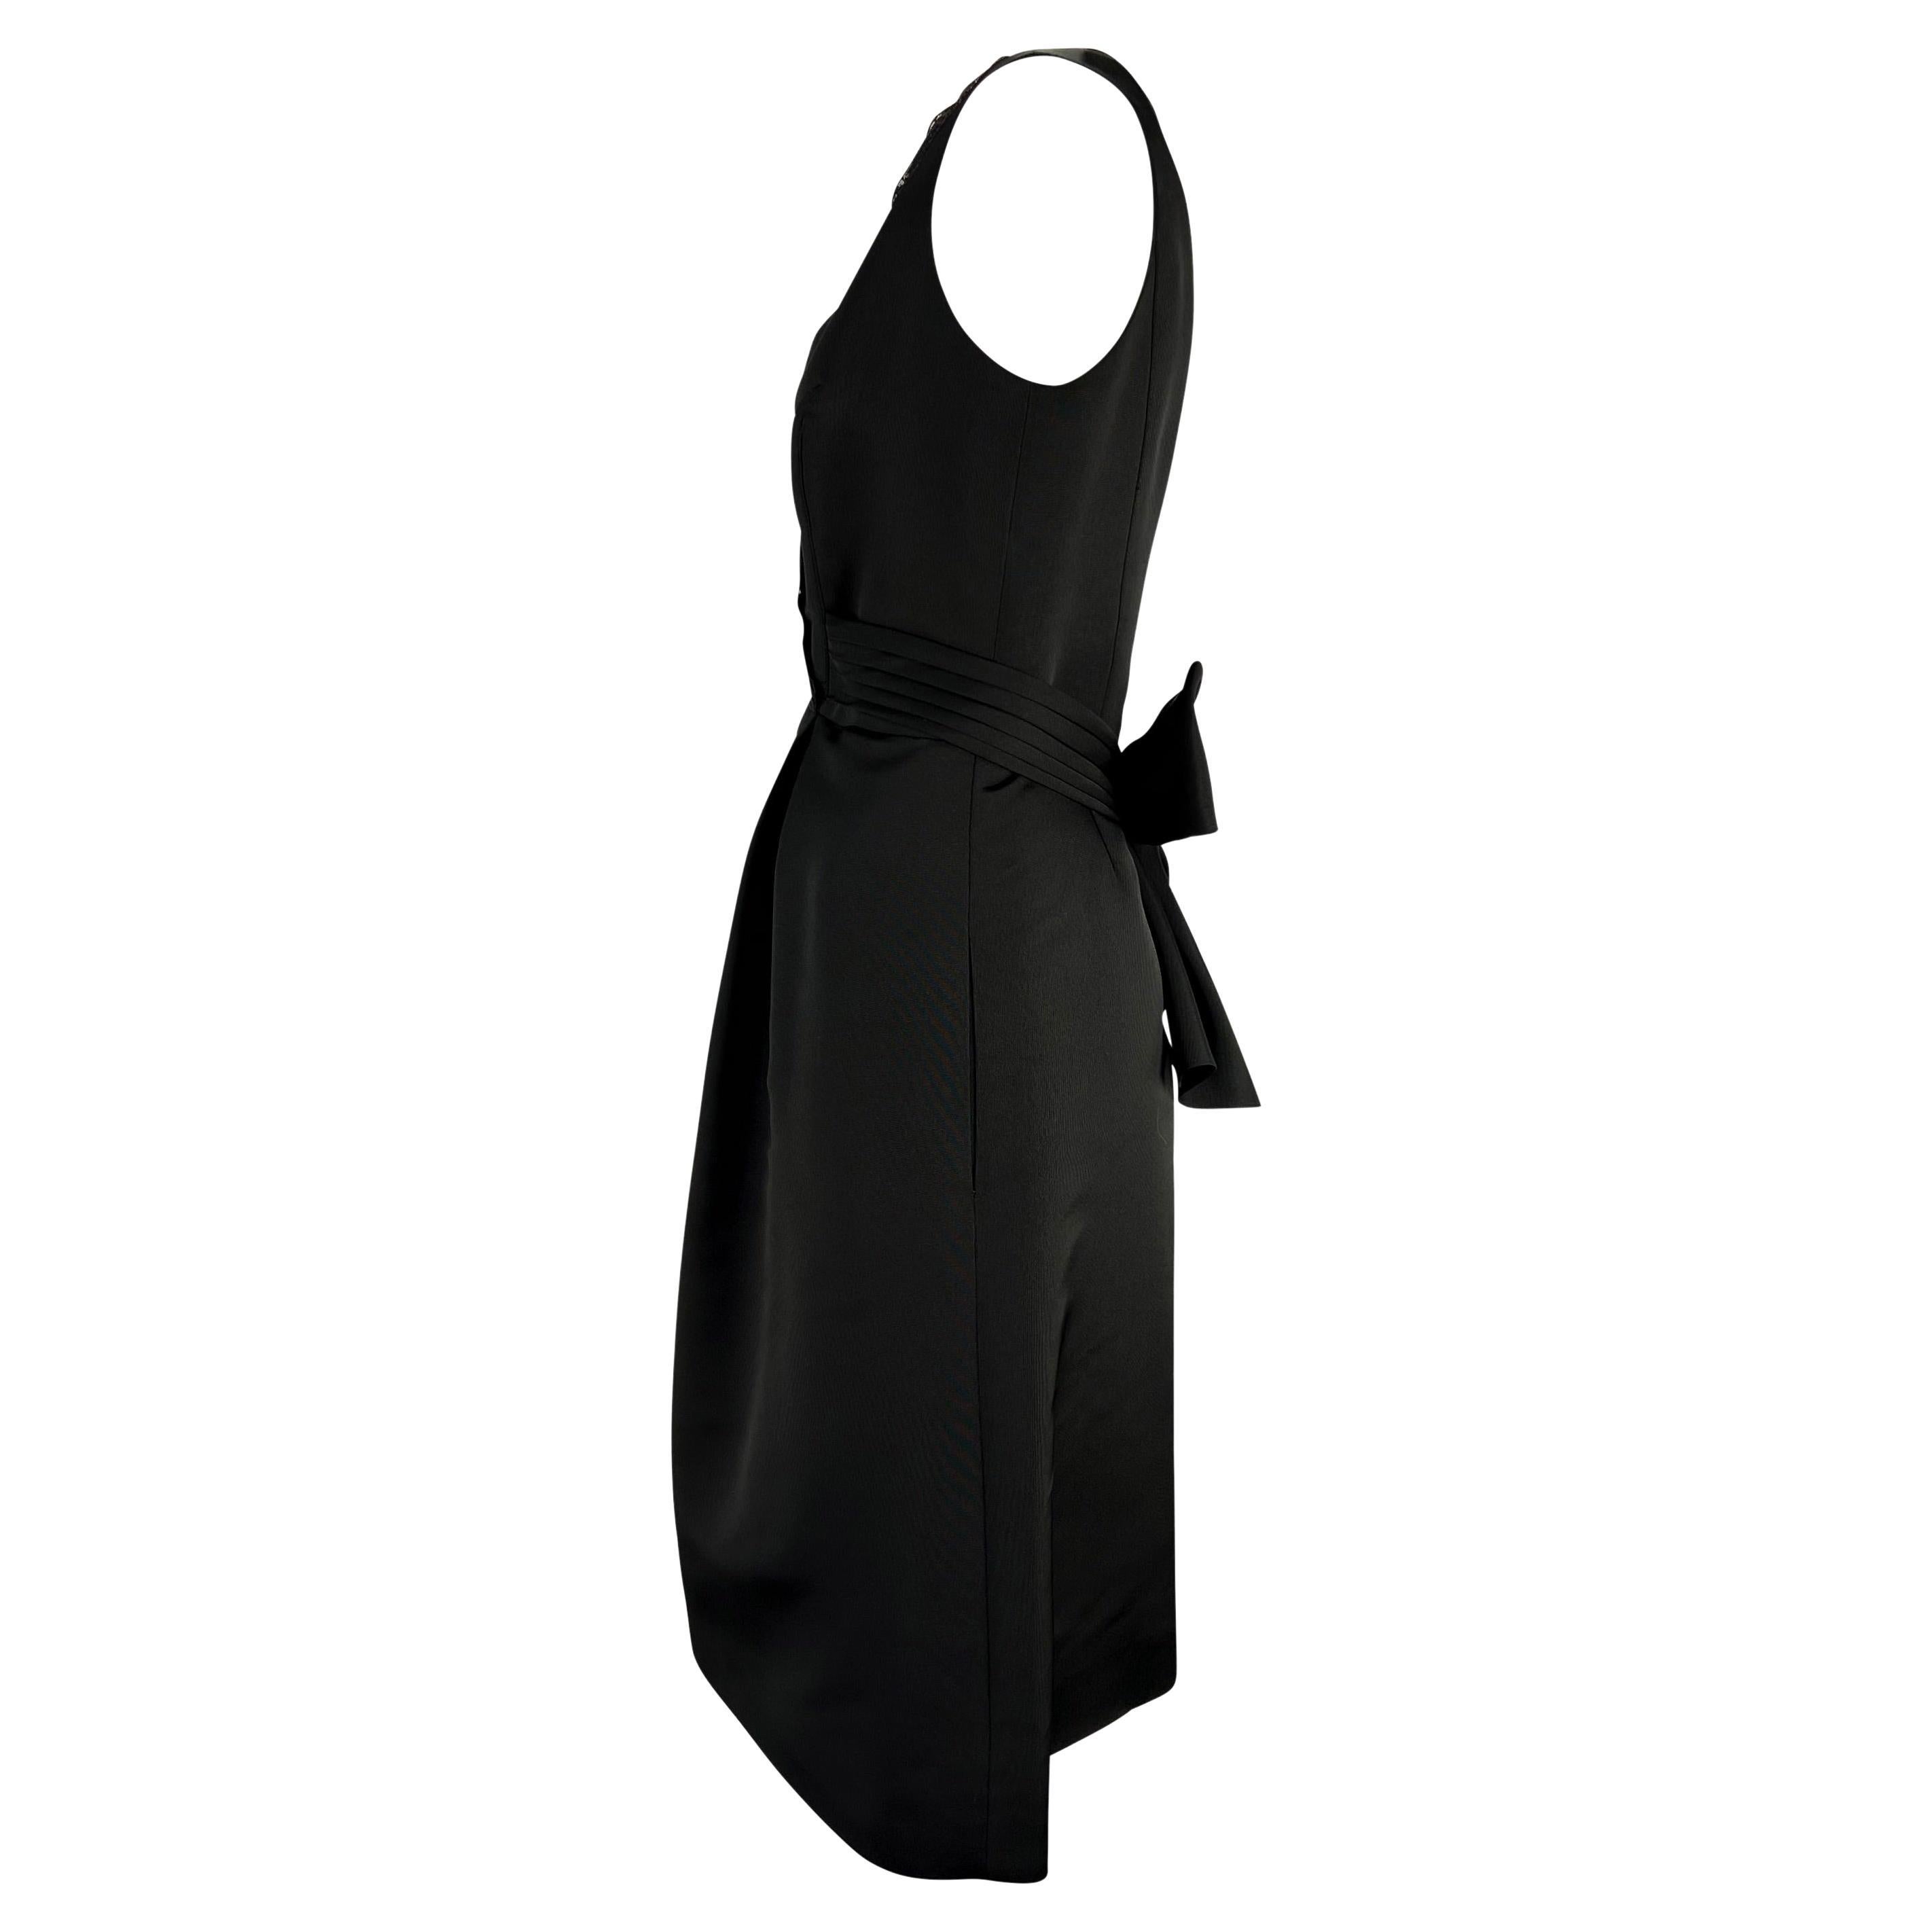 Presenting an elegant vintage Bill Blass little black dress. From the 1990s, this elegant dress features a v-neckline lined in lace, a bow that wraps around the waist, and concealed pockets at the hips. Effortlessly classy, this Bill Blass dress